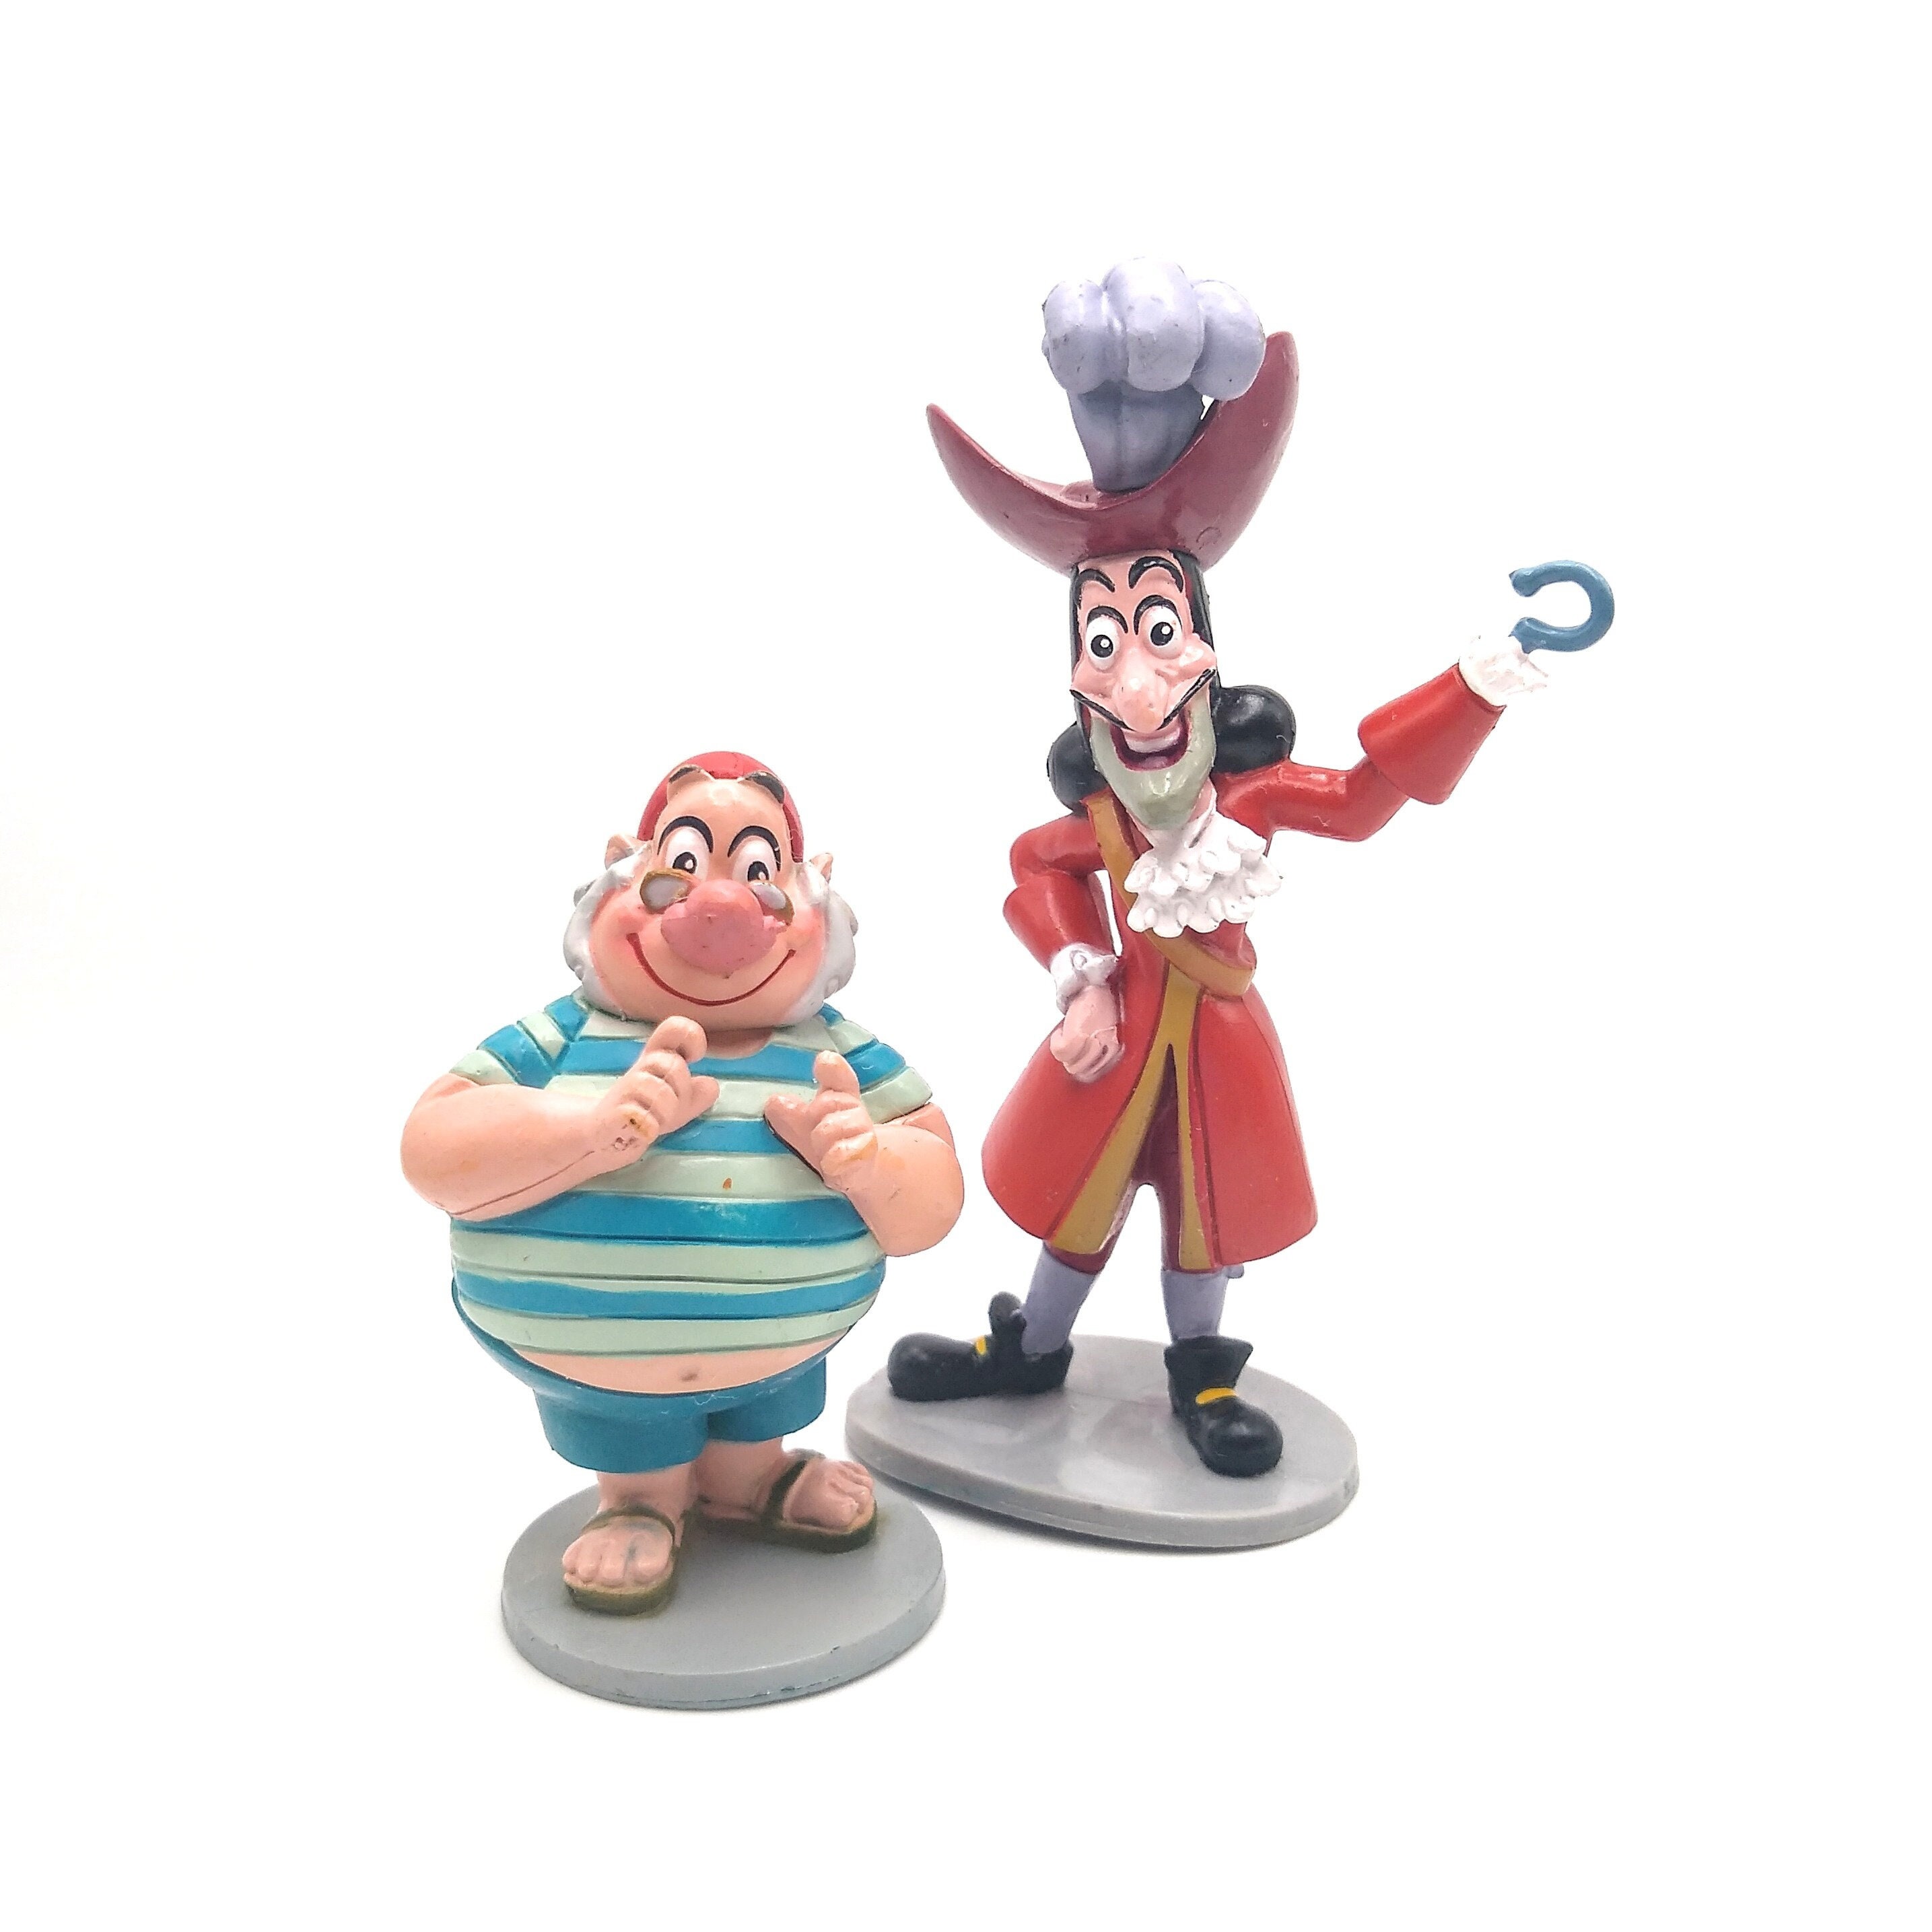 Captain Hook and Smee PVC Figures, Cake Toppers, Disney Peter Pan Toy  Figurines Collectibles